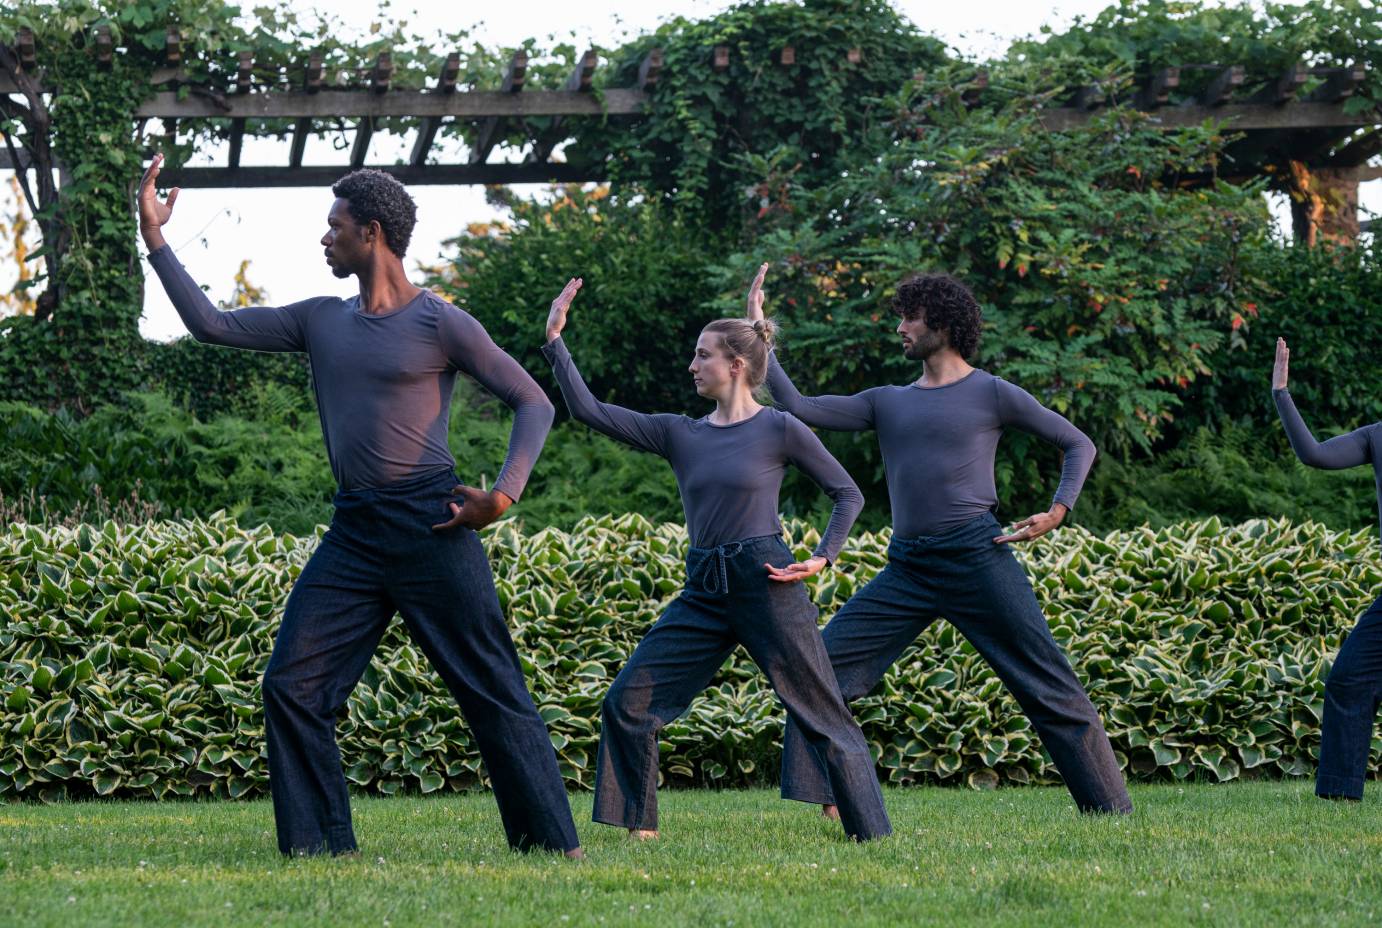 In a beautiful outdoor setting of trees and bushes, three dancers stand in profile with one arm rounded upward and another arm rounded at the hip